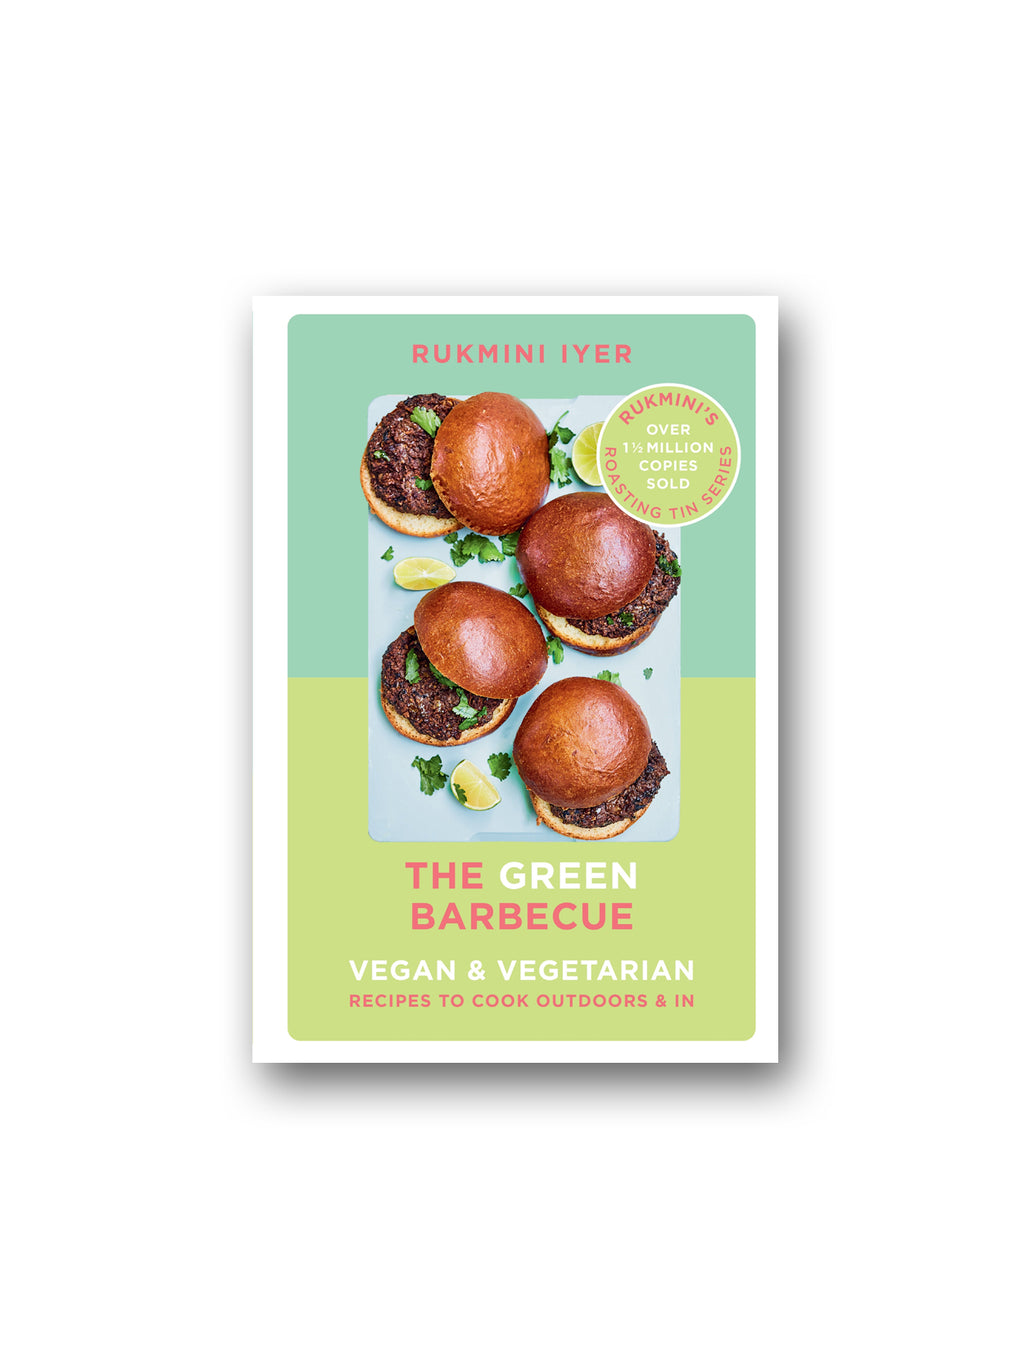 The Green Barbecue: Vegan & Vegetarian Recipes to Cook Outdoors & In